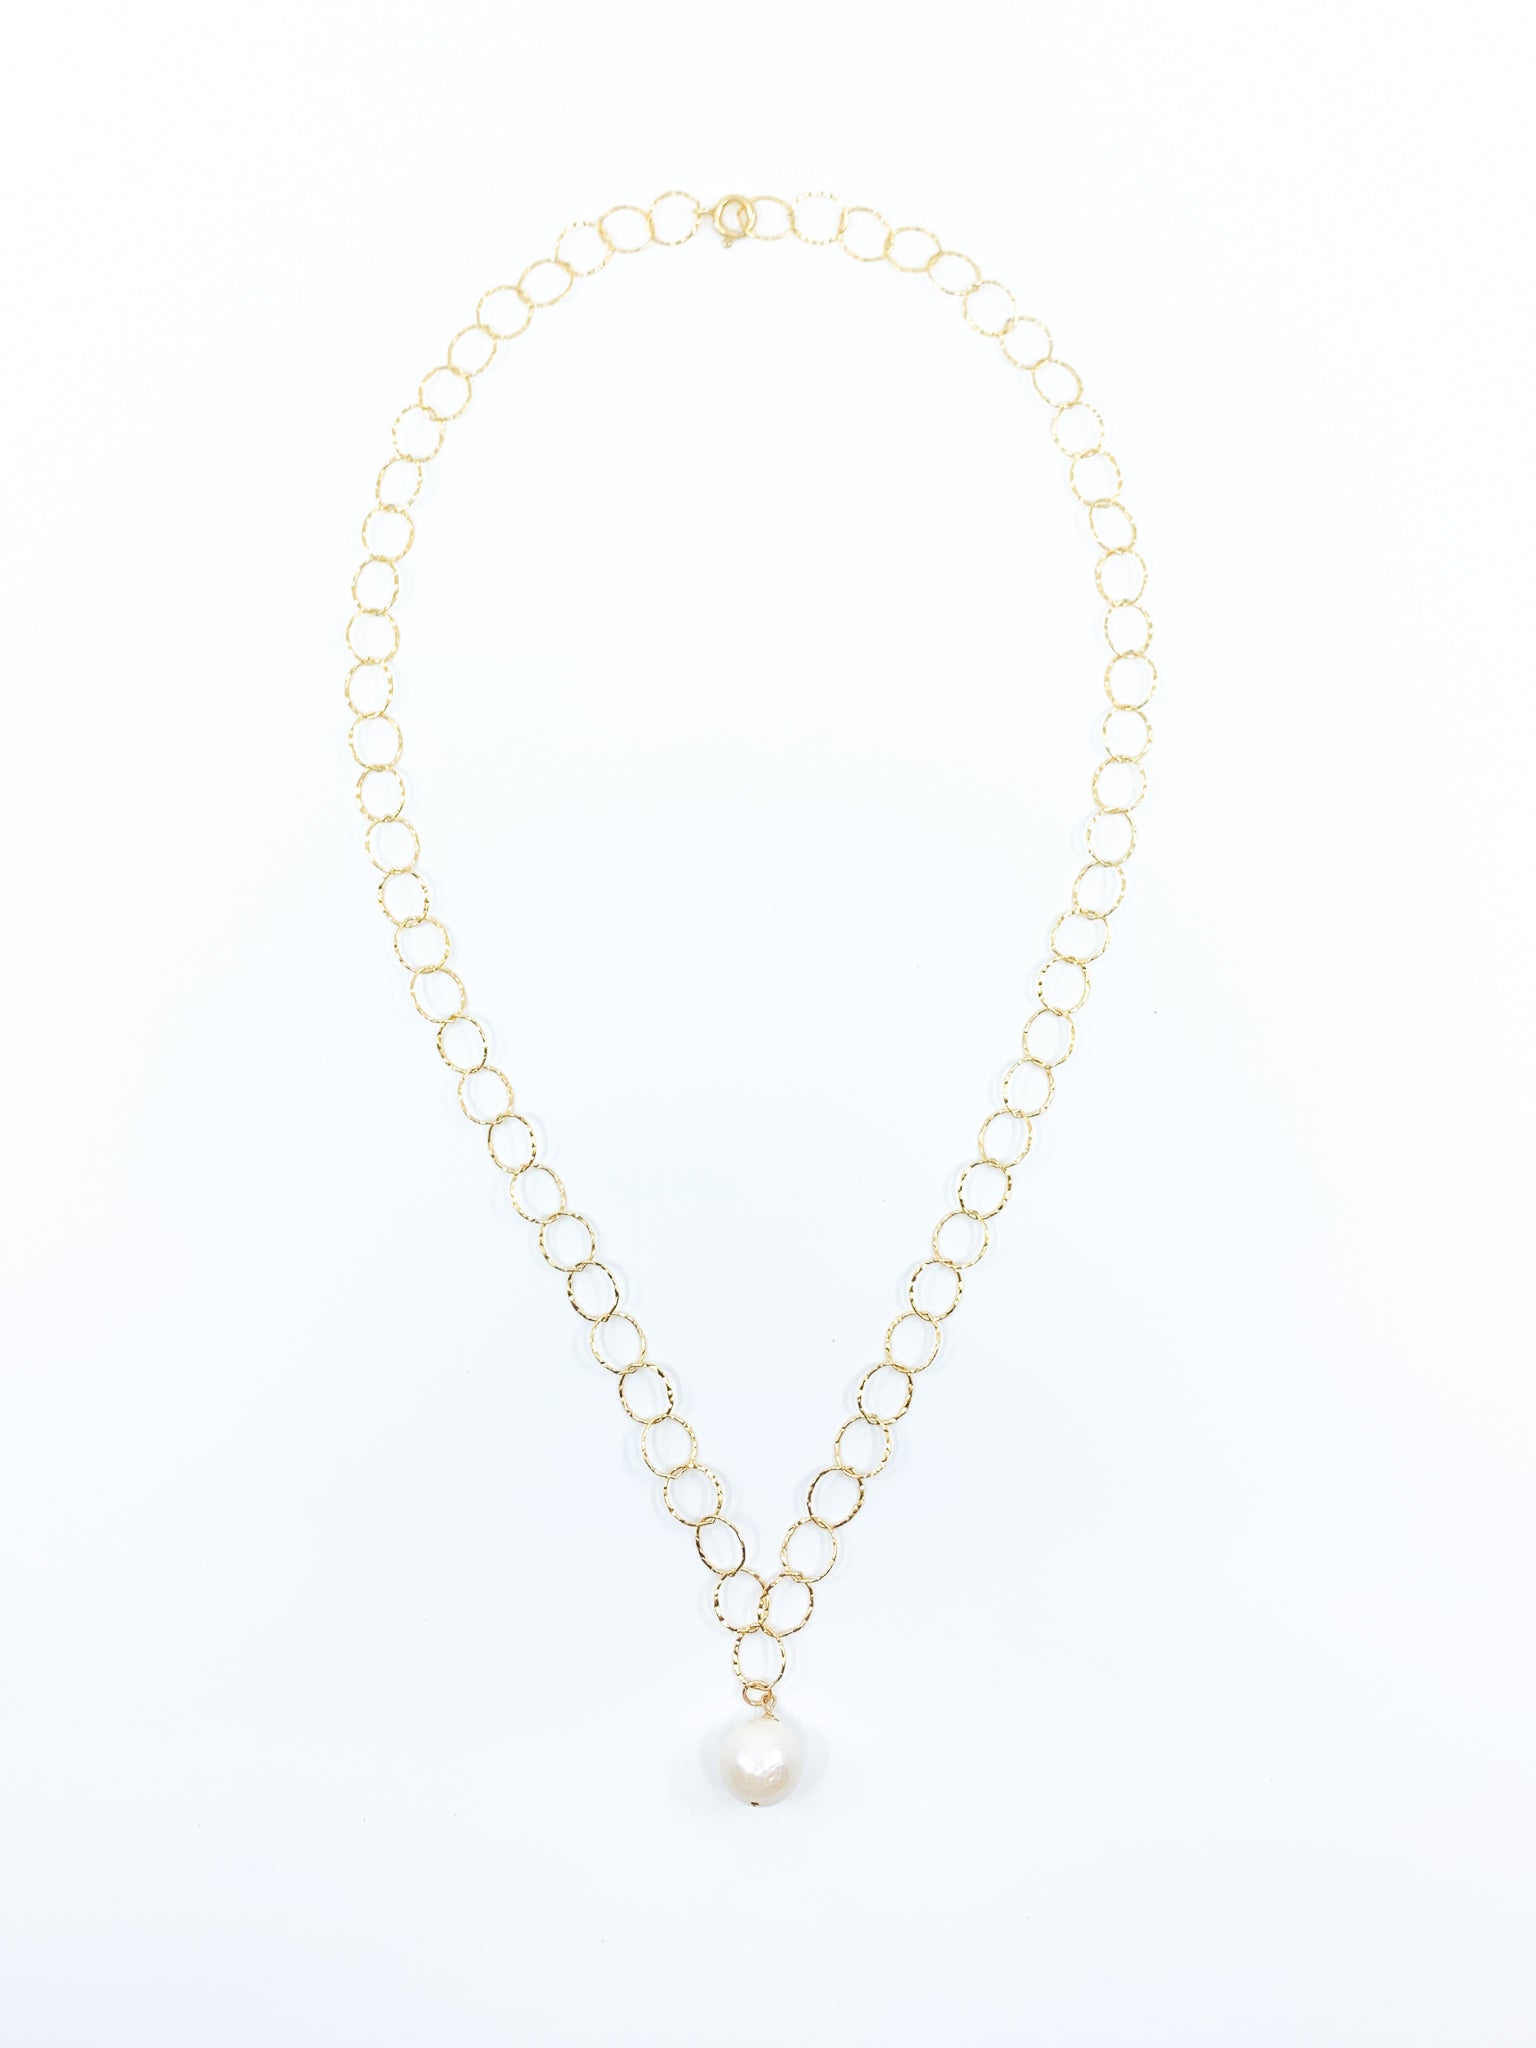 white pearl gold chain necklace by eve black jewelry made in Hawaii